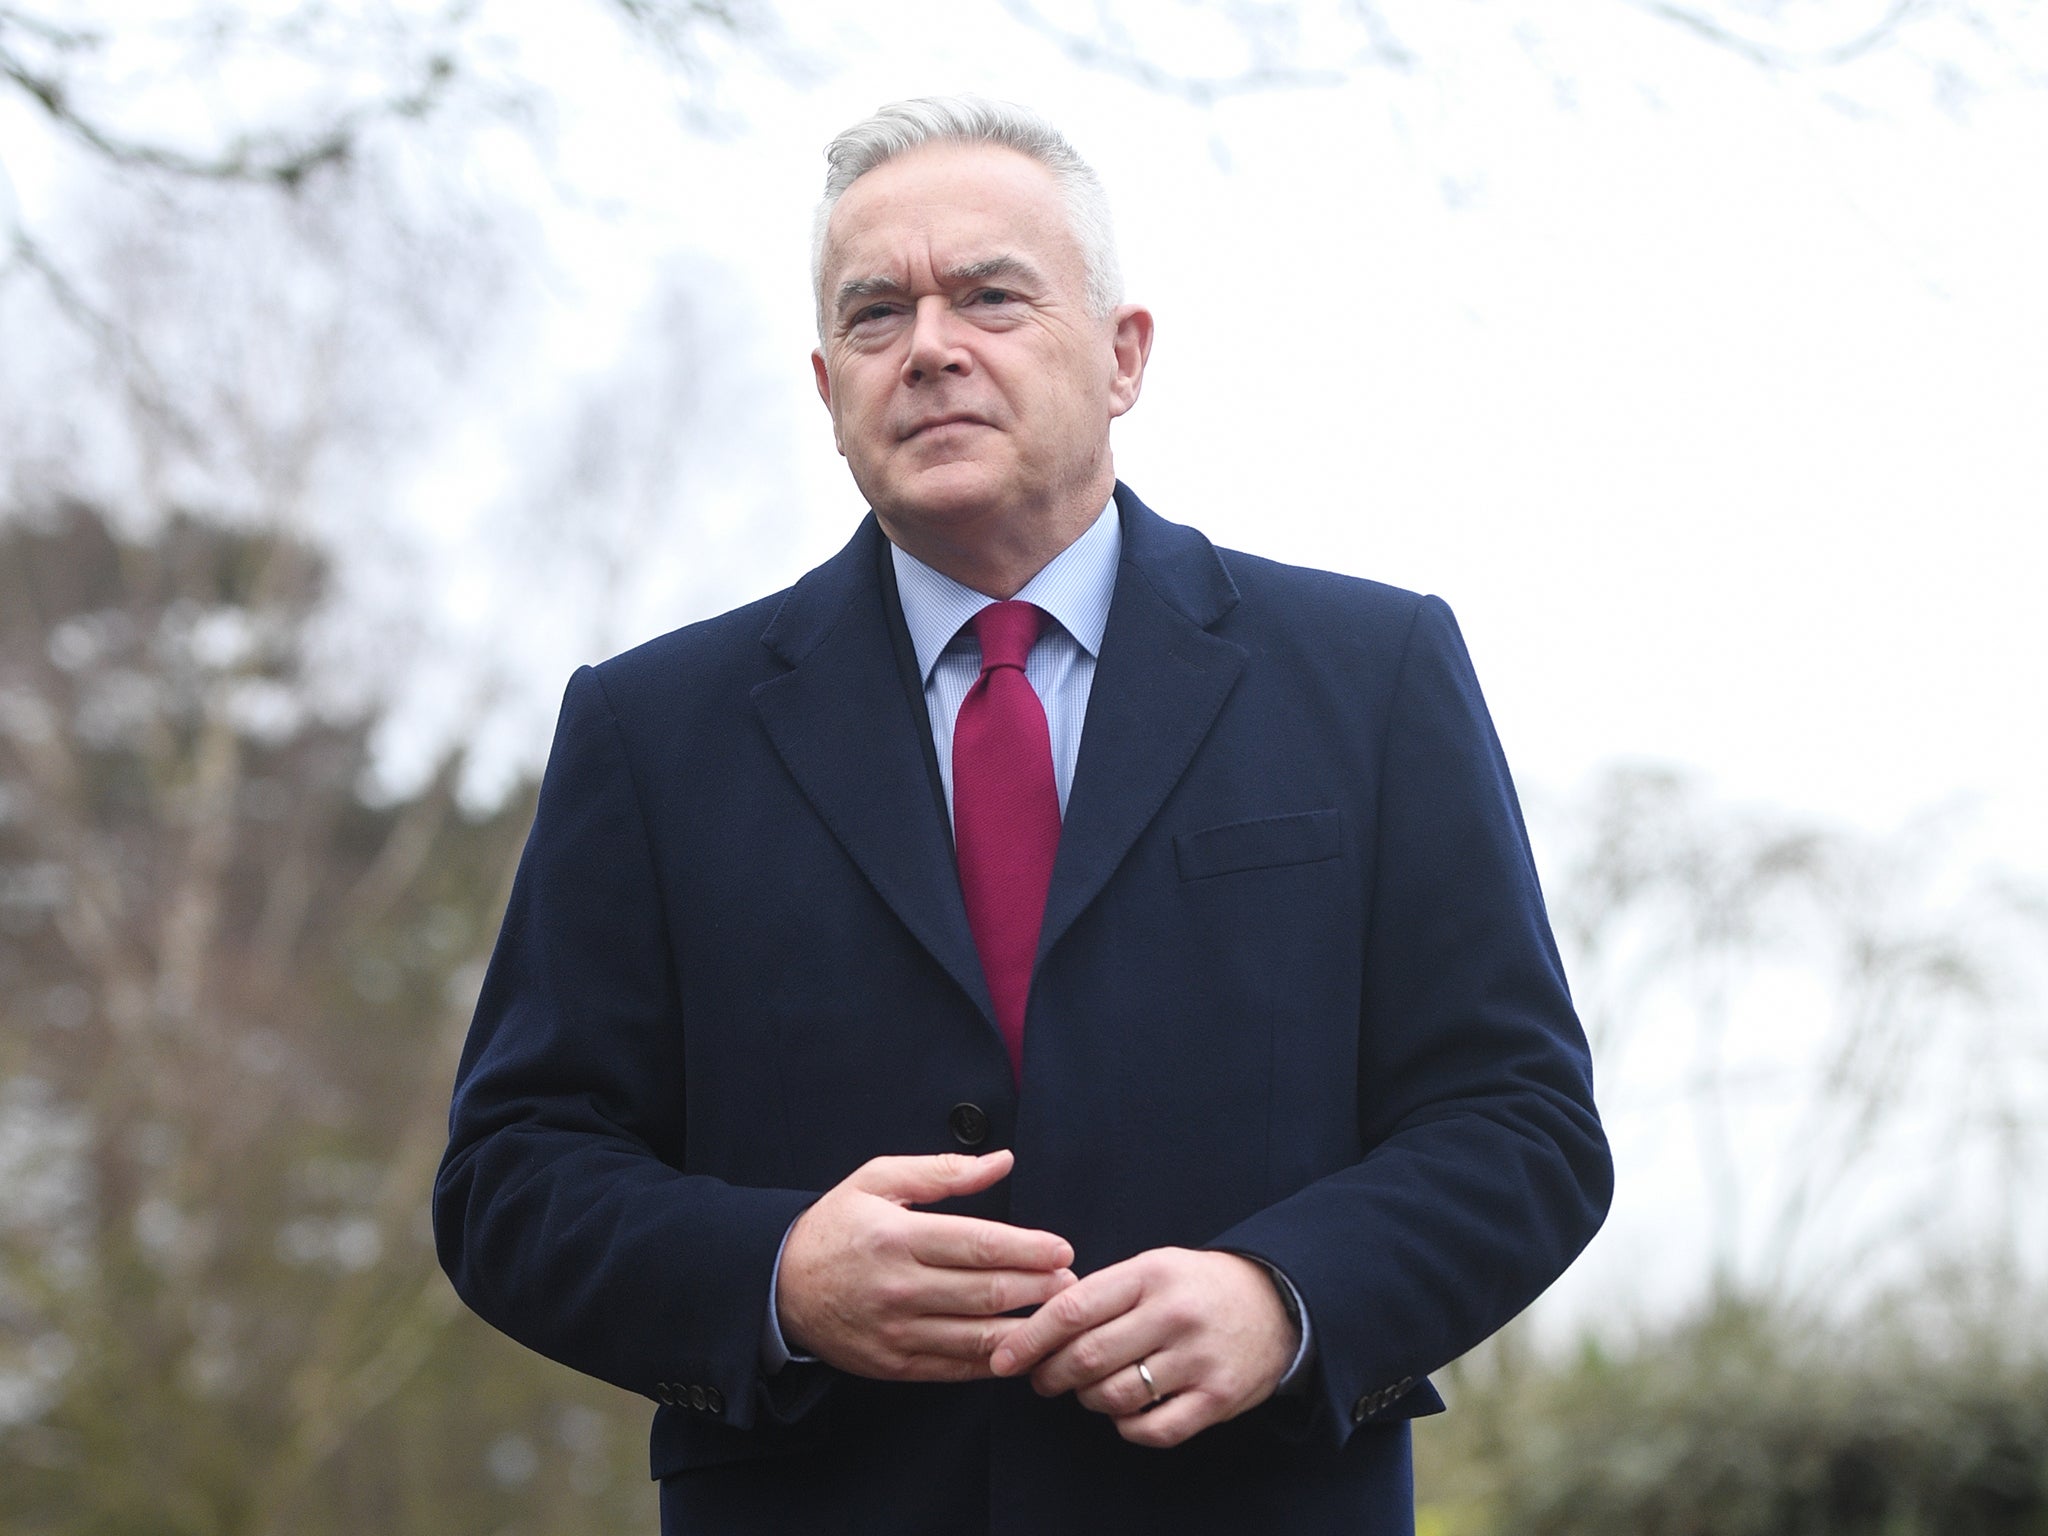 Huw Edwards BBC presenter who broke Queens death now at centre of sex scandal The Independent photo